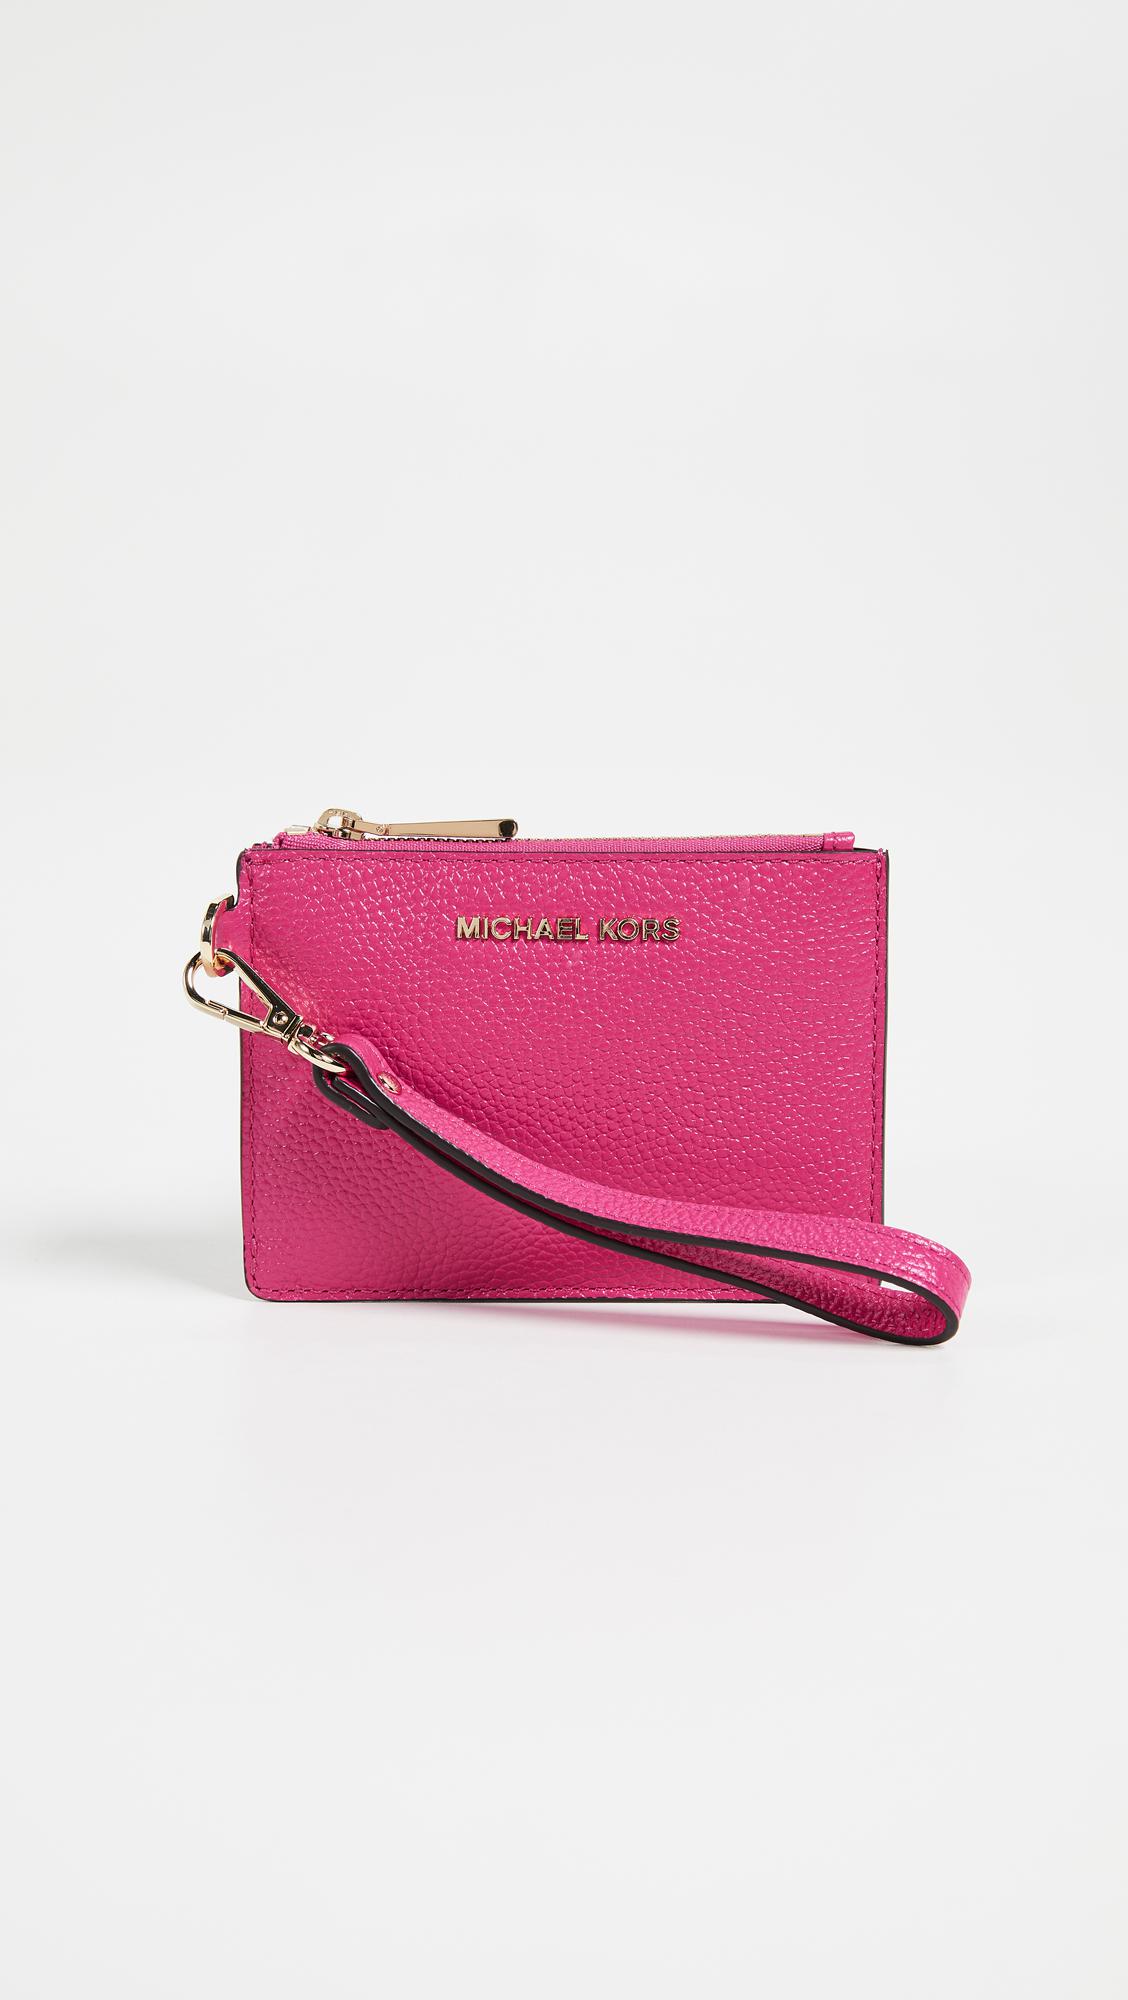 MICHAEL Michael Kors Leather Mercer Small Coin Purse in Ultra Pink (Pink) -  Lyst